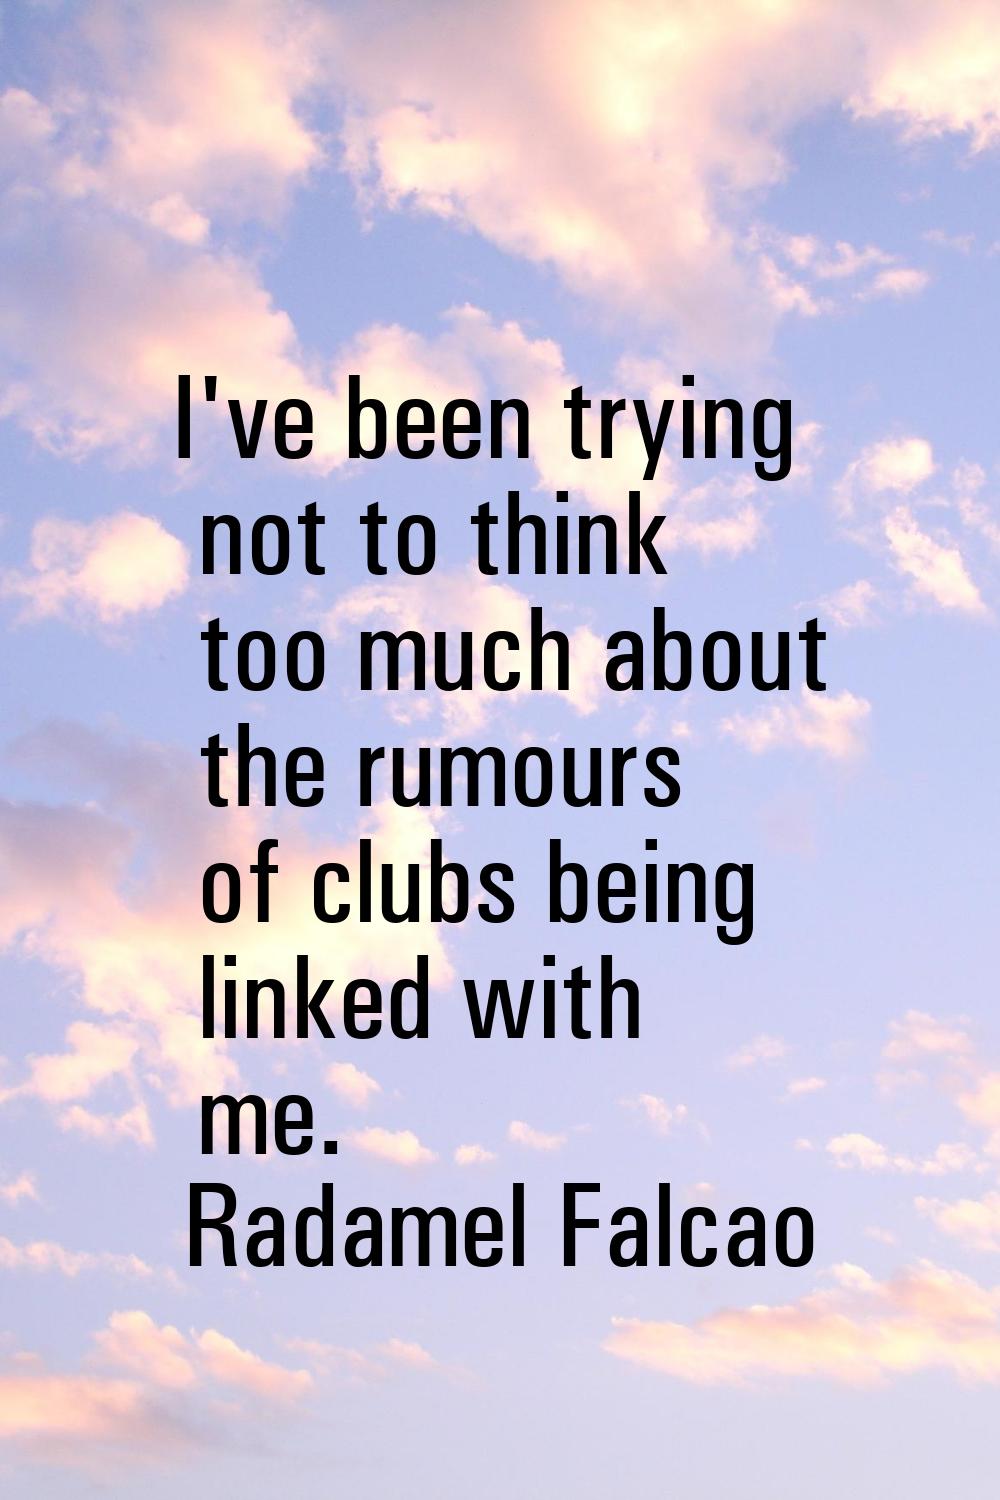 I've been trying not to think too much about the rumours of clubs being linked with me.